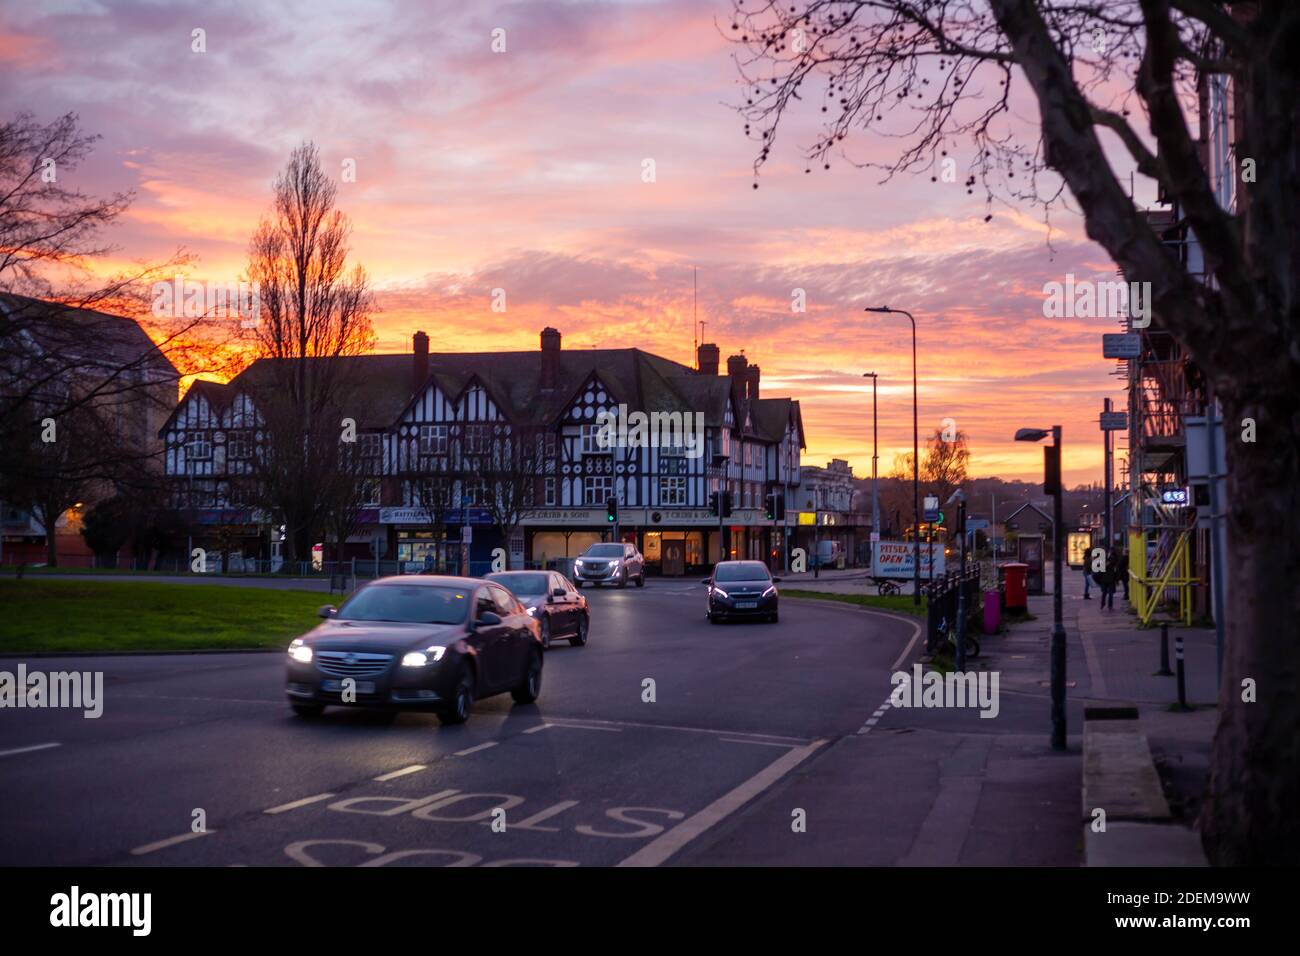 View of Road Traffic at Pitsea High Road, Essex, Britain at sunset. Stock Photo